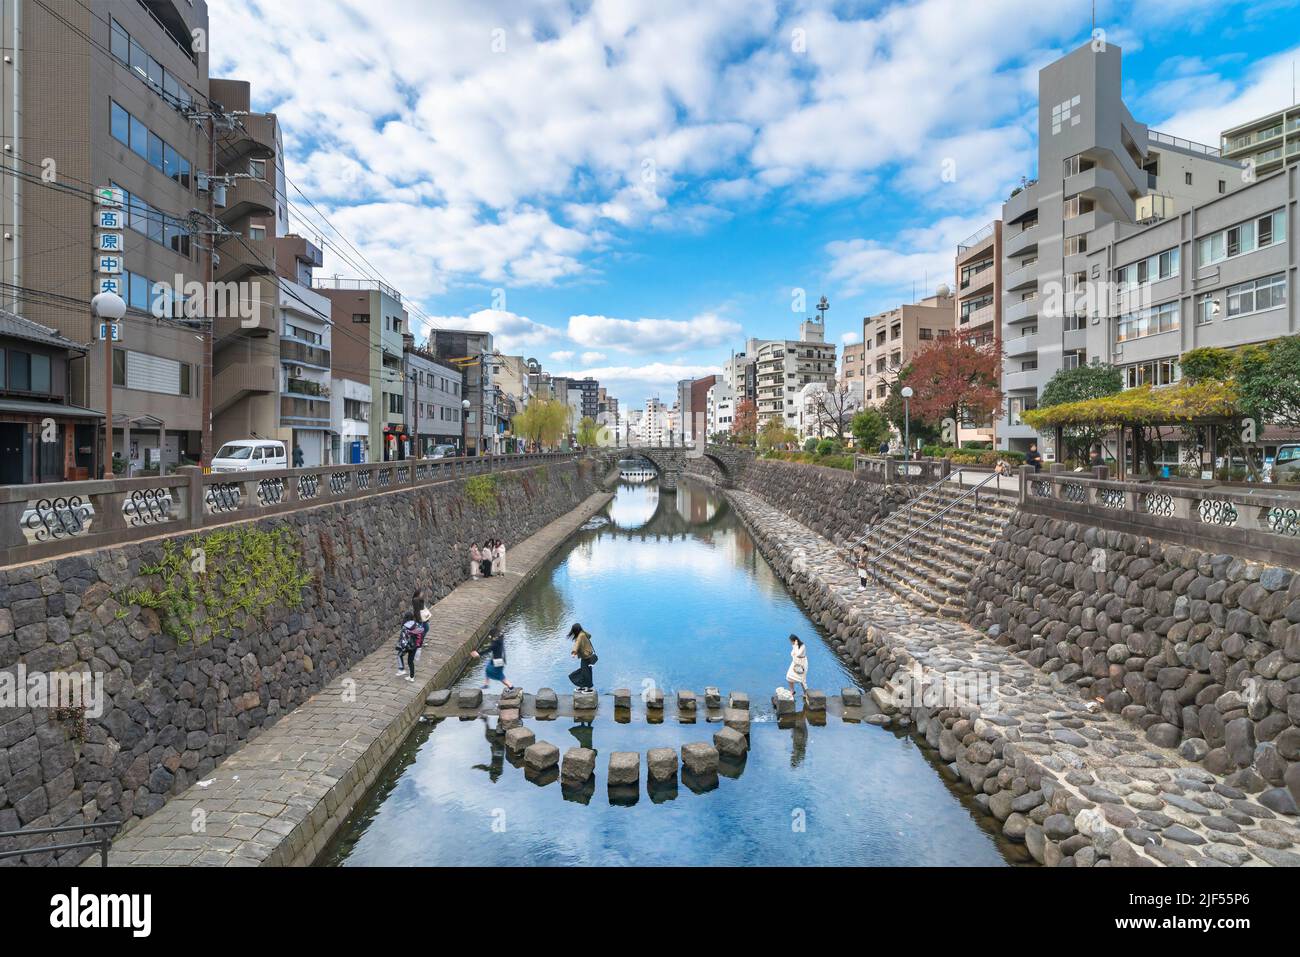 nagasaki, kyushu - december 12 2021: Group of young tourists girls walking on a stone path crossing the Nakashima river in front of Meganebashi or Spe Stock Photo